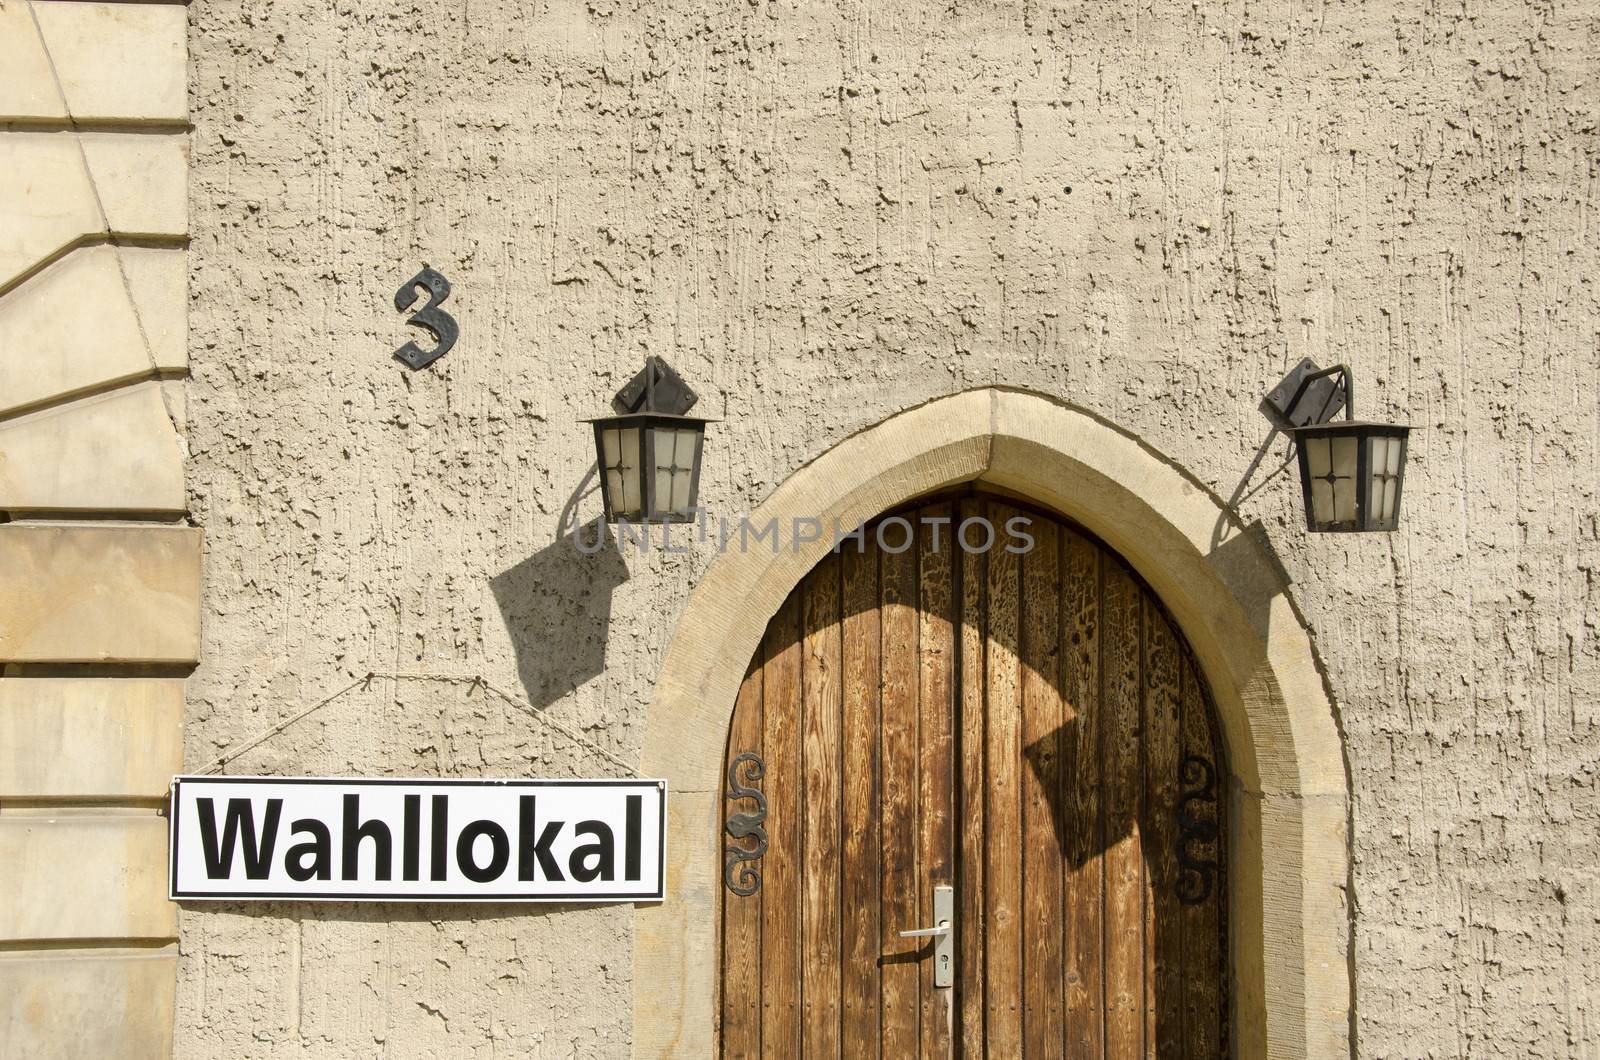 German sign for elections on a house wall, Wahllokal